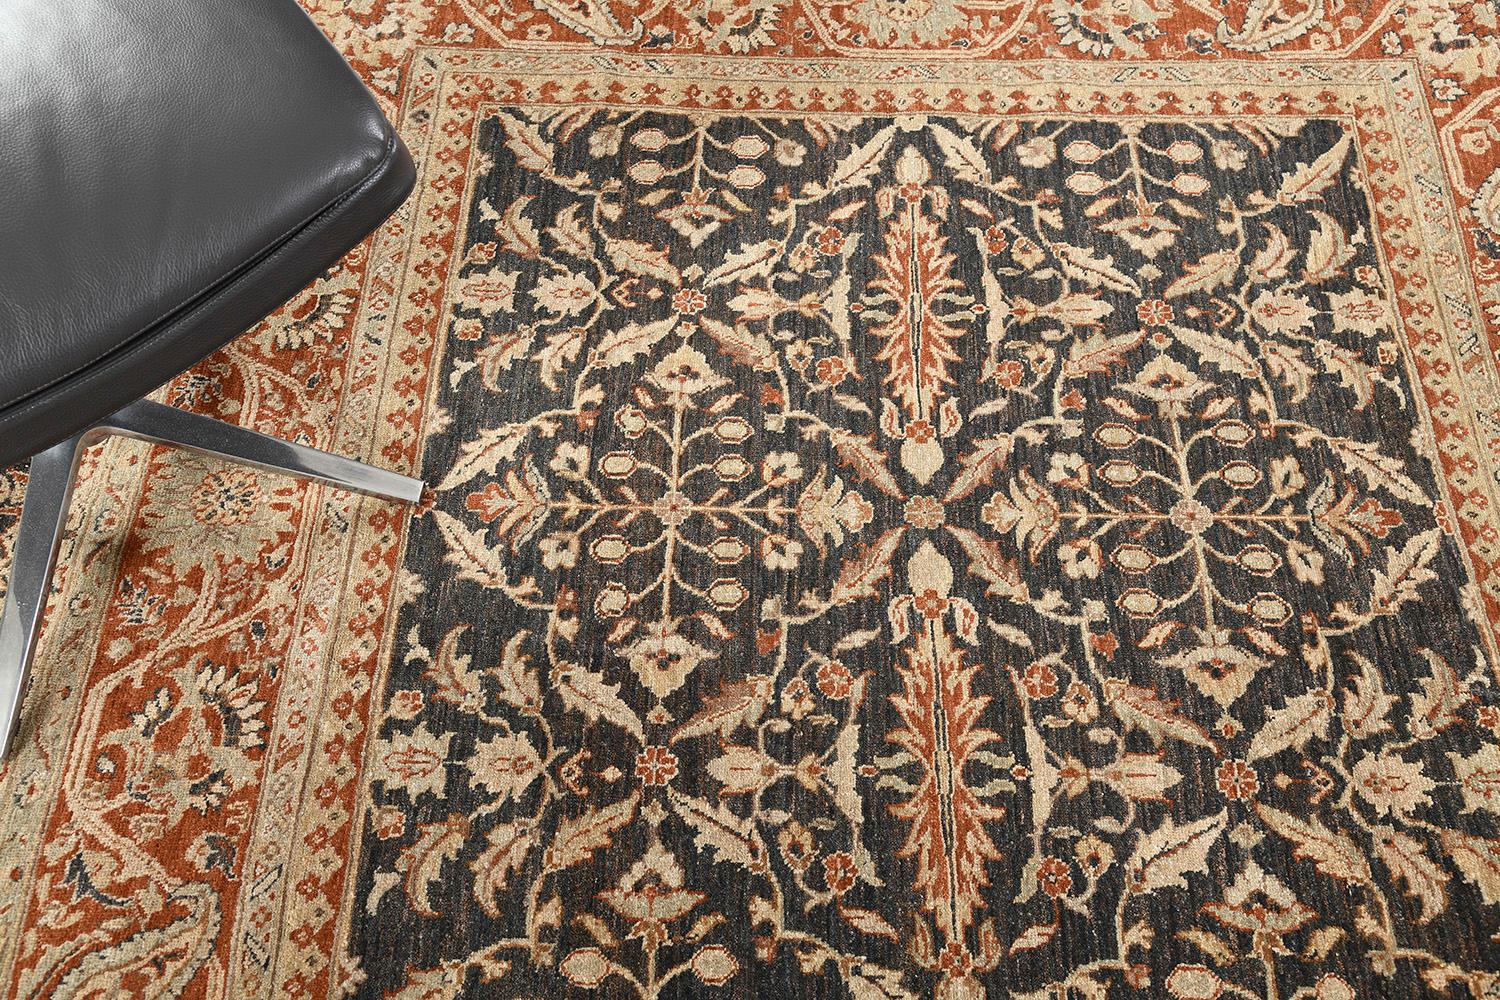 This is a stylish hand-spun wool revival of Amritsar using a vegetable dye. Fashionable florid designs and leafy scrolls are harmoniously contributed to the surrounded symmetrical florets and vines. While the rug dominants a vibrant orange border,